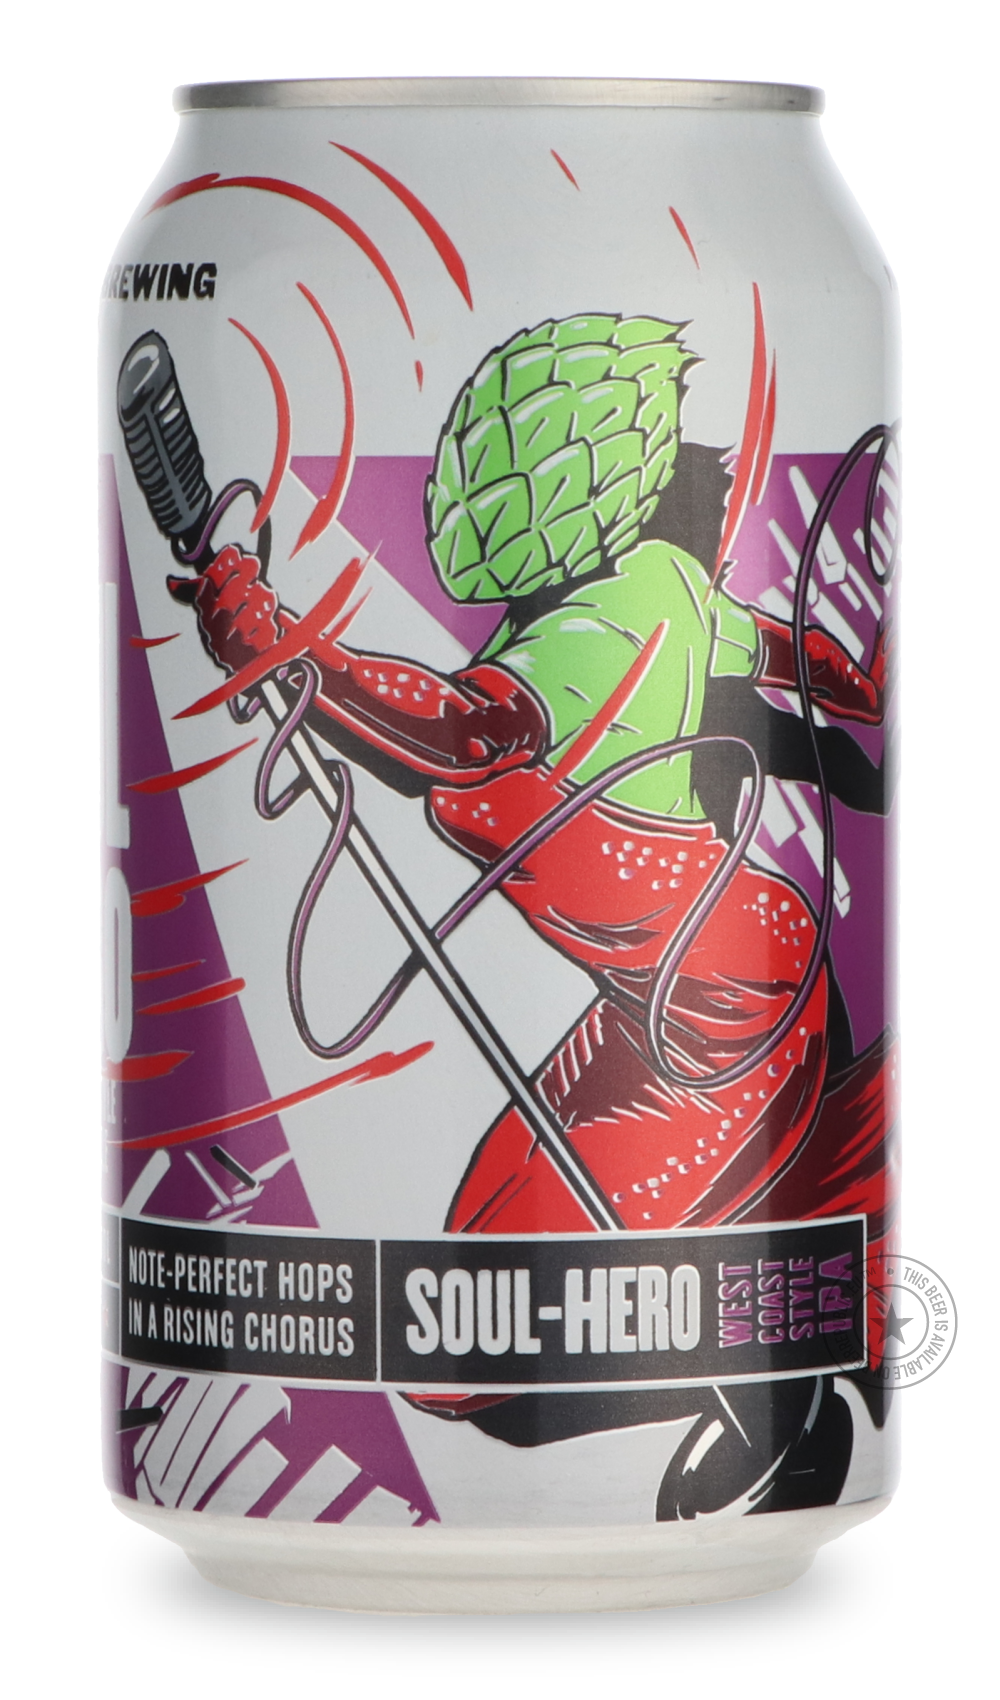 -Revolution- Soul-Hero-IPA- Only @ Beer Republic - The best online beer store for American & Canadian craft beer - Buy beer online from the USA and Canada - Bier online kopen - Amerikaans bier kopen - Craft beer store - Craft beer kopen - Amerikanisch bier kaufen - Bier online kaufen - Acheter biere online - IPA - Stout - Porter - New England IPA - Hazy IPA - Imperial Stout - Barrel Aged - Barrel Aged Imperial Stout - Brown - Dark beer - Blond - Blonde - Pilsner - Lager - Wheat - Weizen - Amber - Barley Win